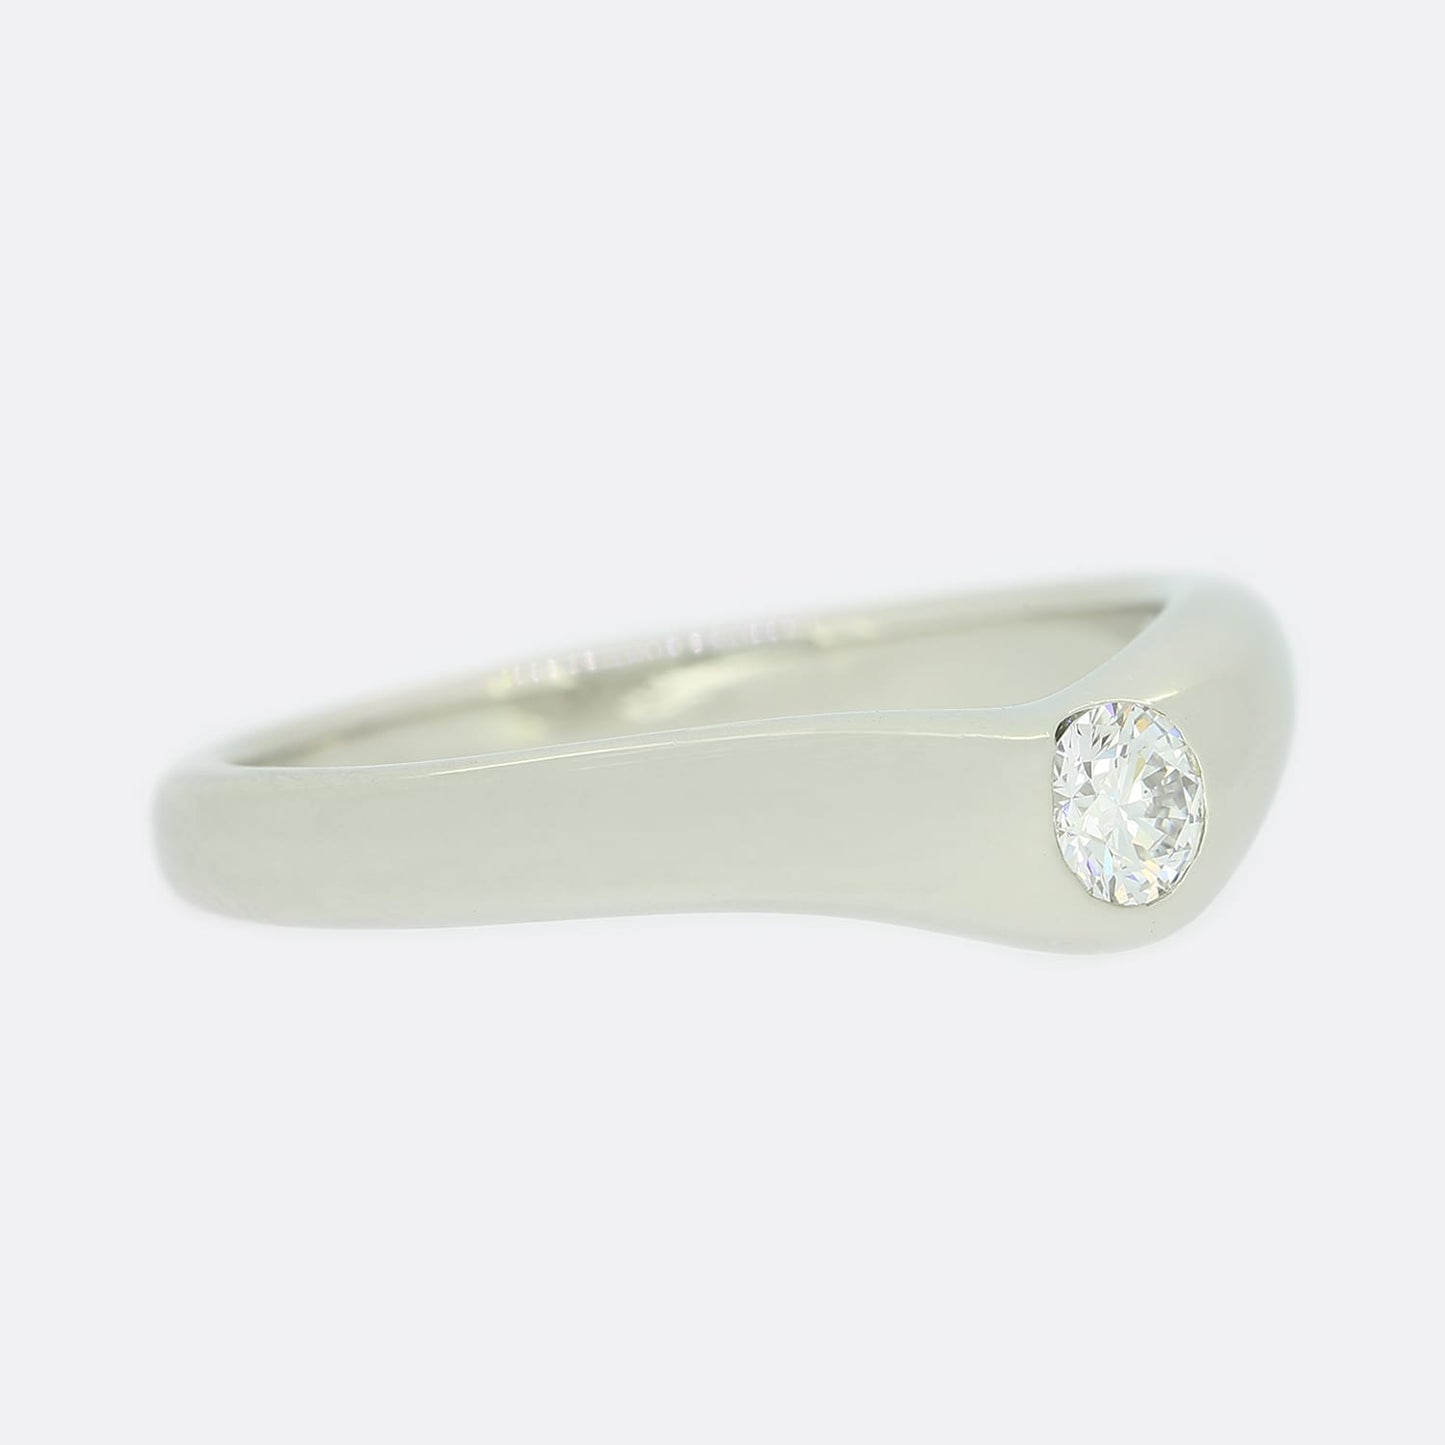 Tiffany & Co. Curved Band Diamond Ring